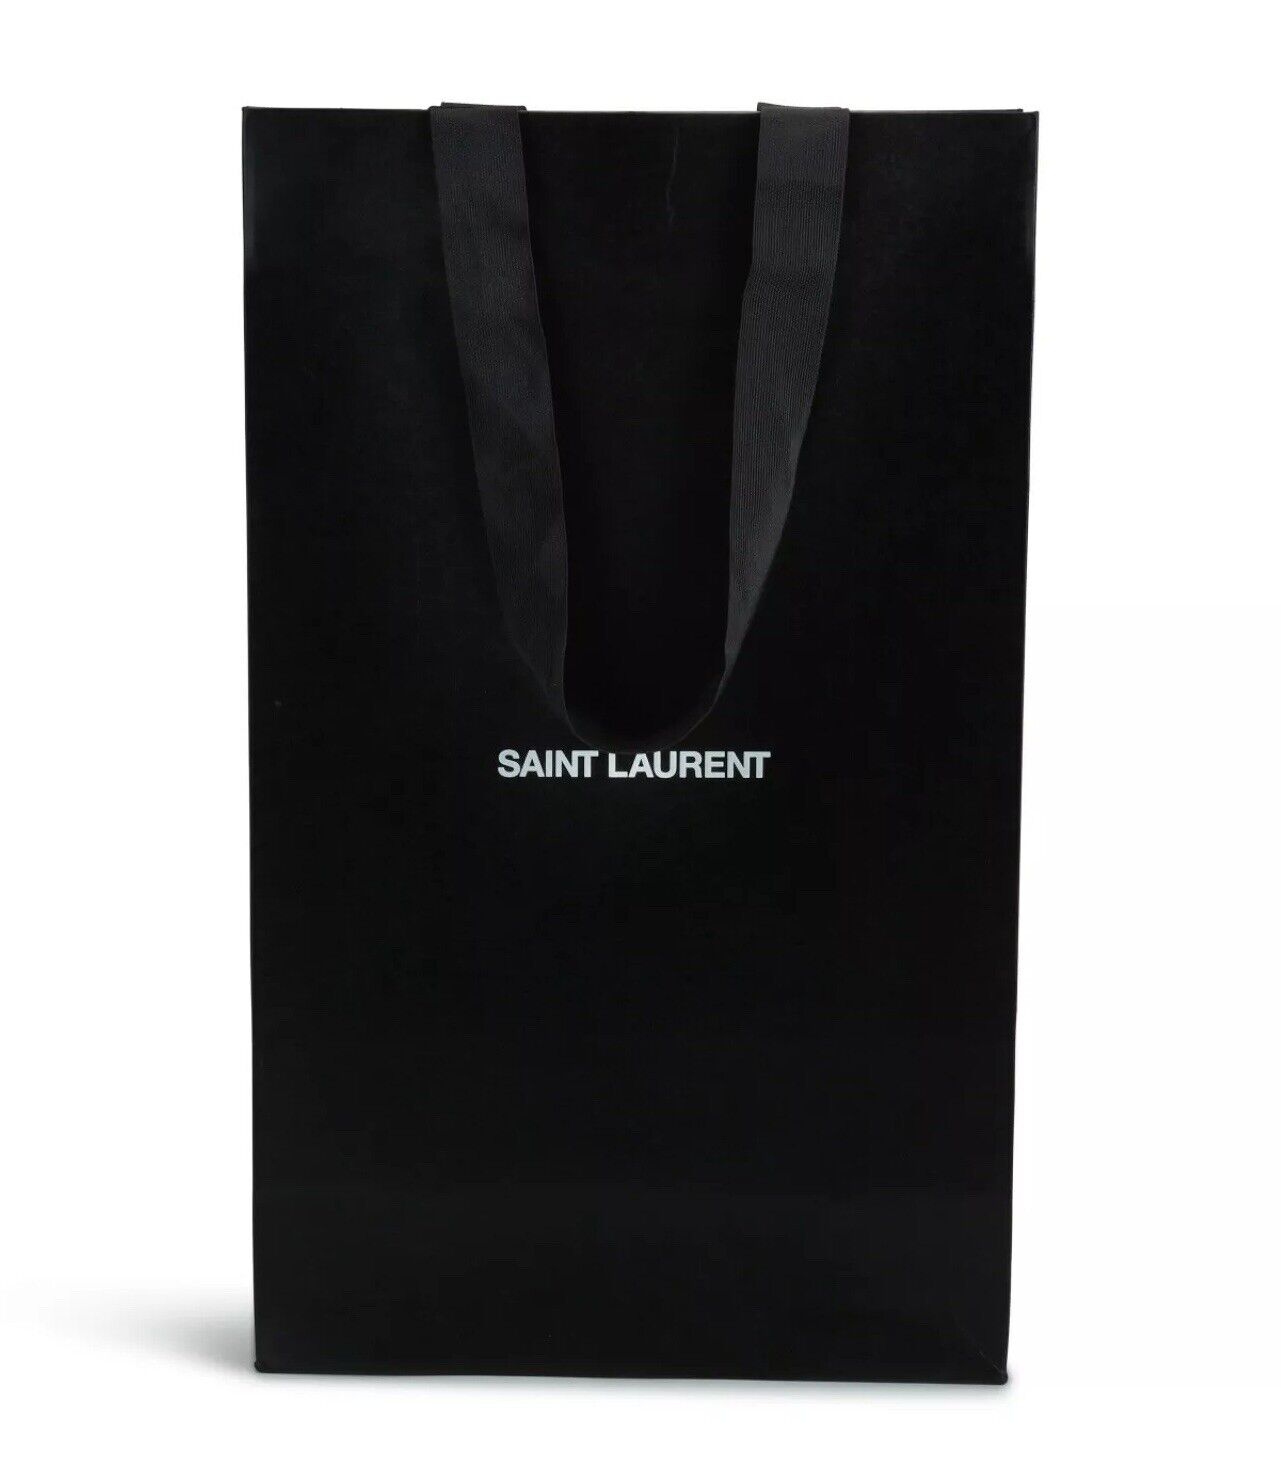 BRAND NEW Authentic Saint Laurent YSL Shopping Gift Tote Bag 12.5 x 20. ...